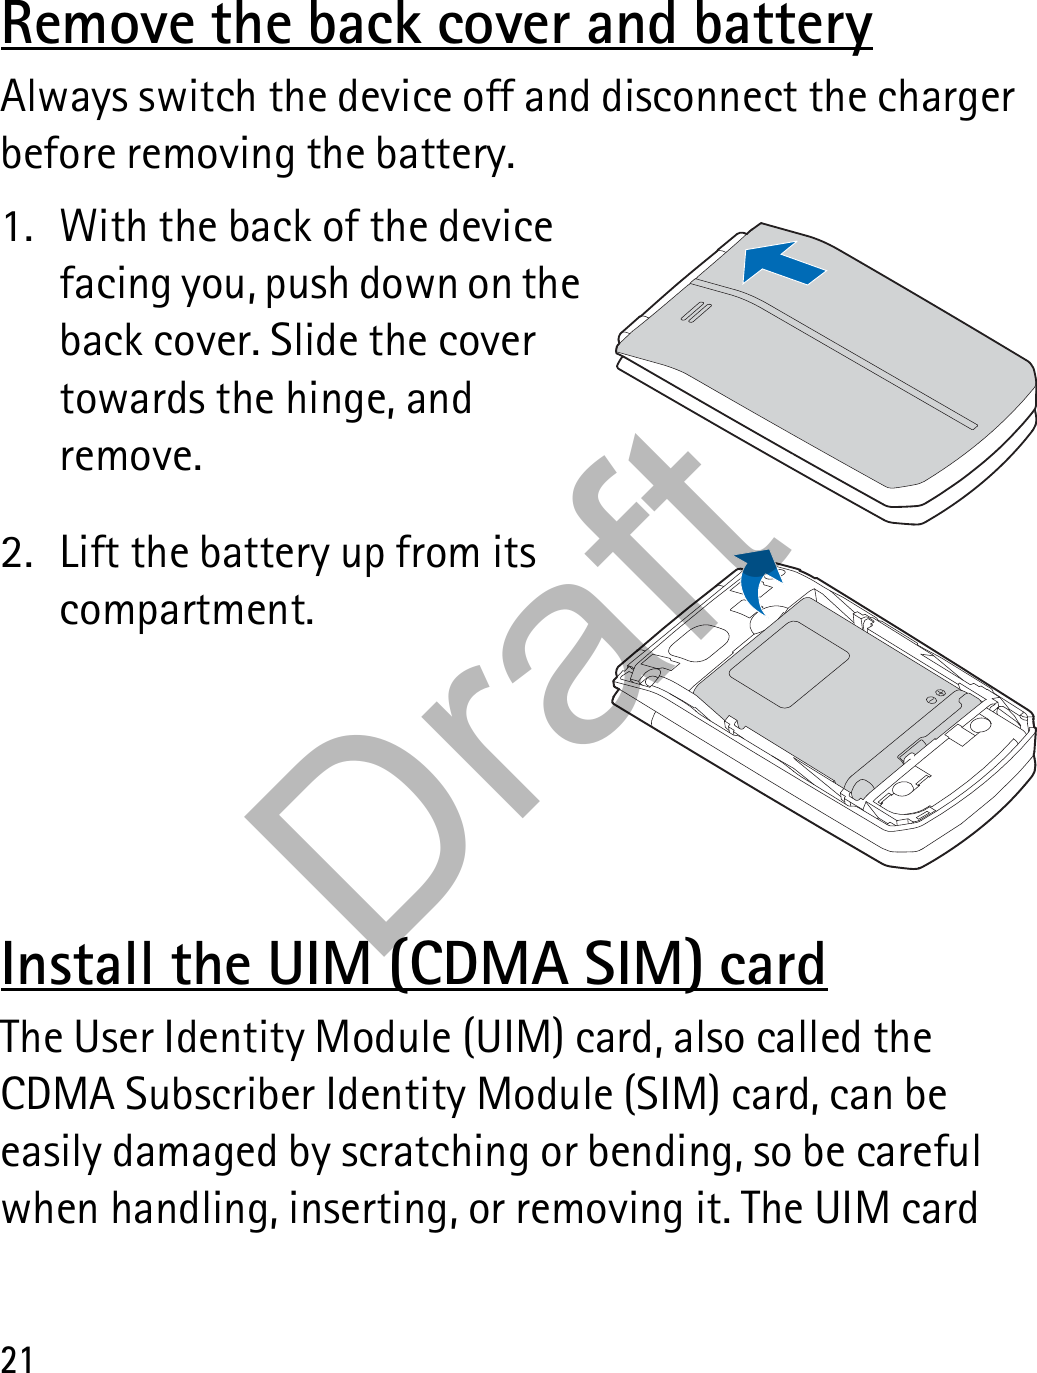 21Remove the back cover and batteryAlways switch the device off and disconnect the charger before removing the battery.1. With the back of the device facing you, push down on the back cover. Slide the cover towards the hinge, and remove.2. Lift the battery up from its compartment.Install the UIM (CDMA SIM) cardThe User Identity Module (UIM) card, also called the CDMA Subscriber Identity Module (SIM) card, can be easily damaged by scratching or bending, so be careful when handling, inserting, or removing it. The UIM card Draft